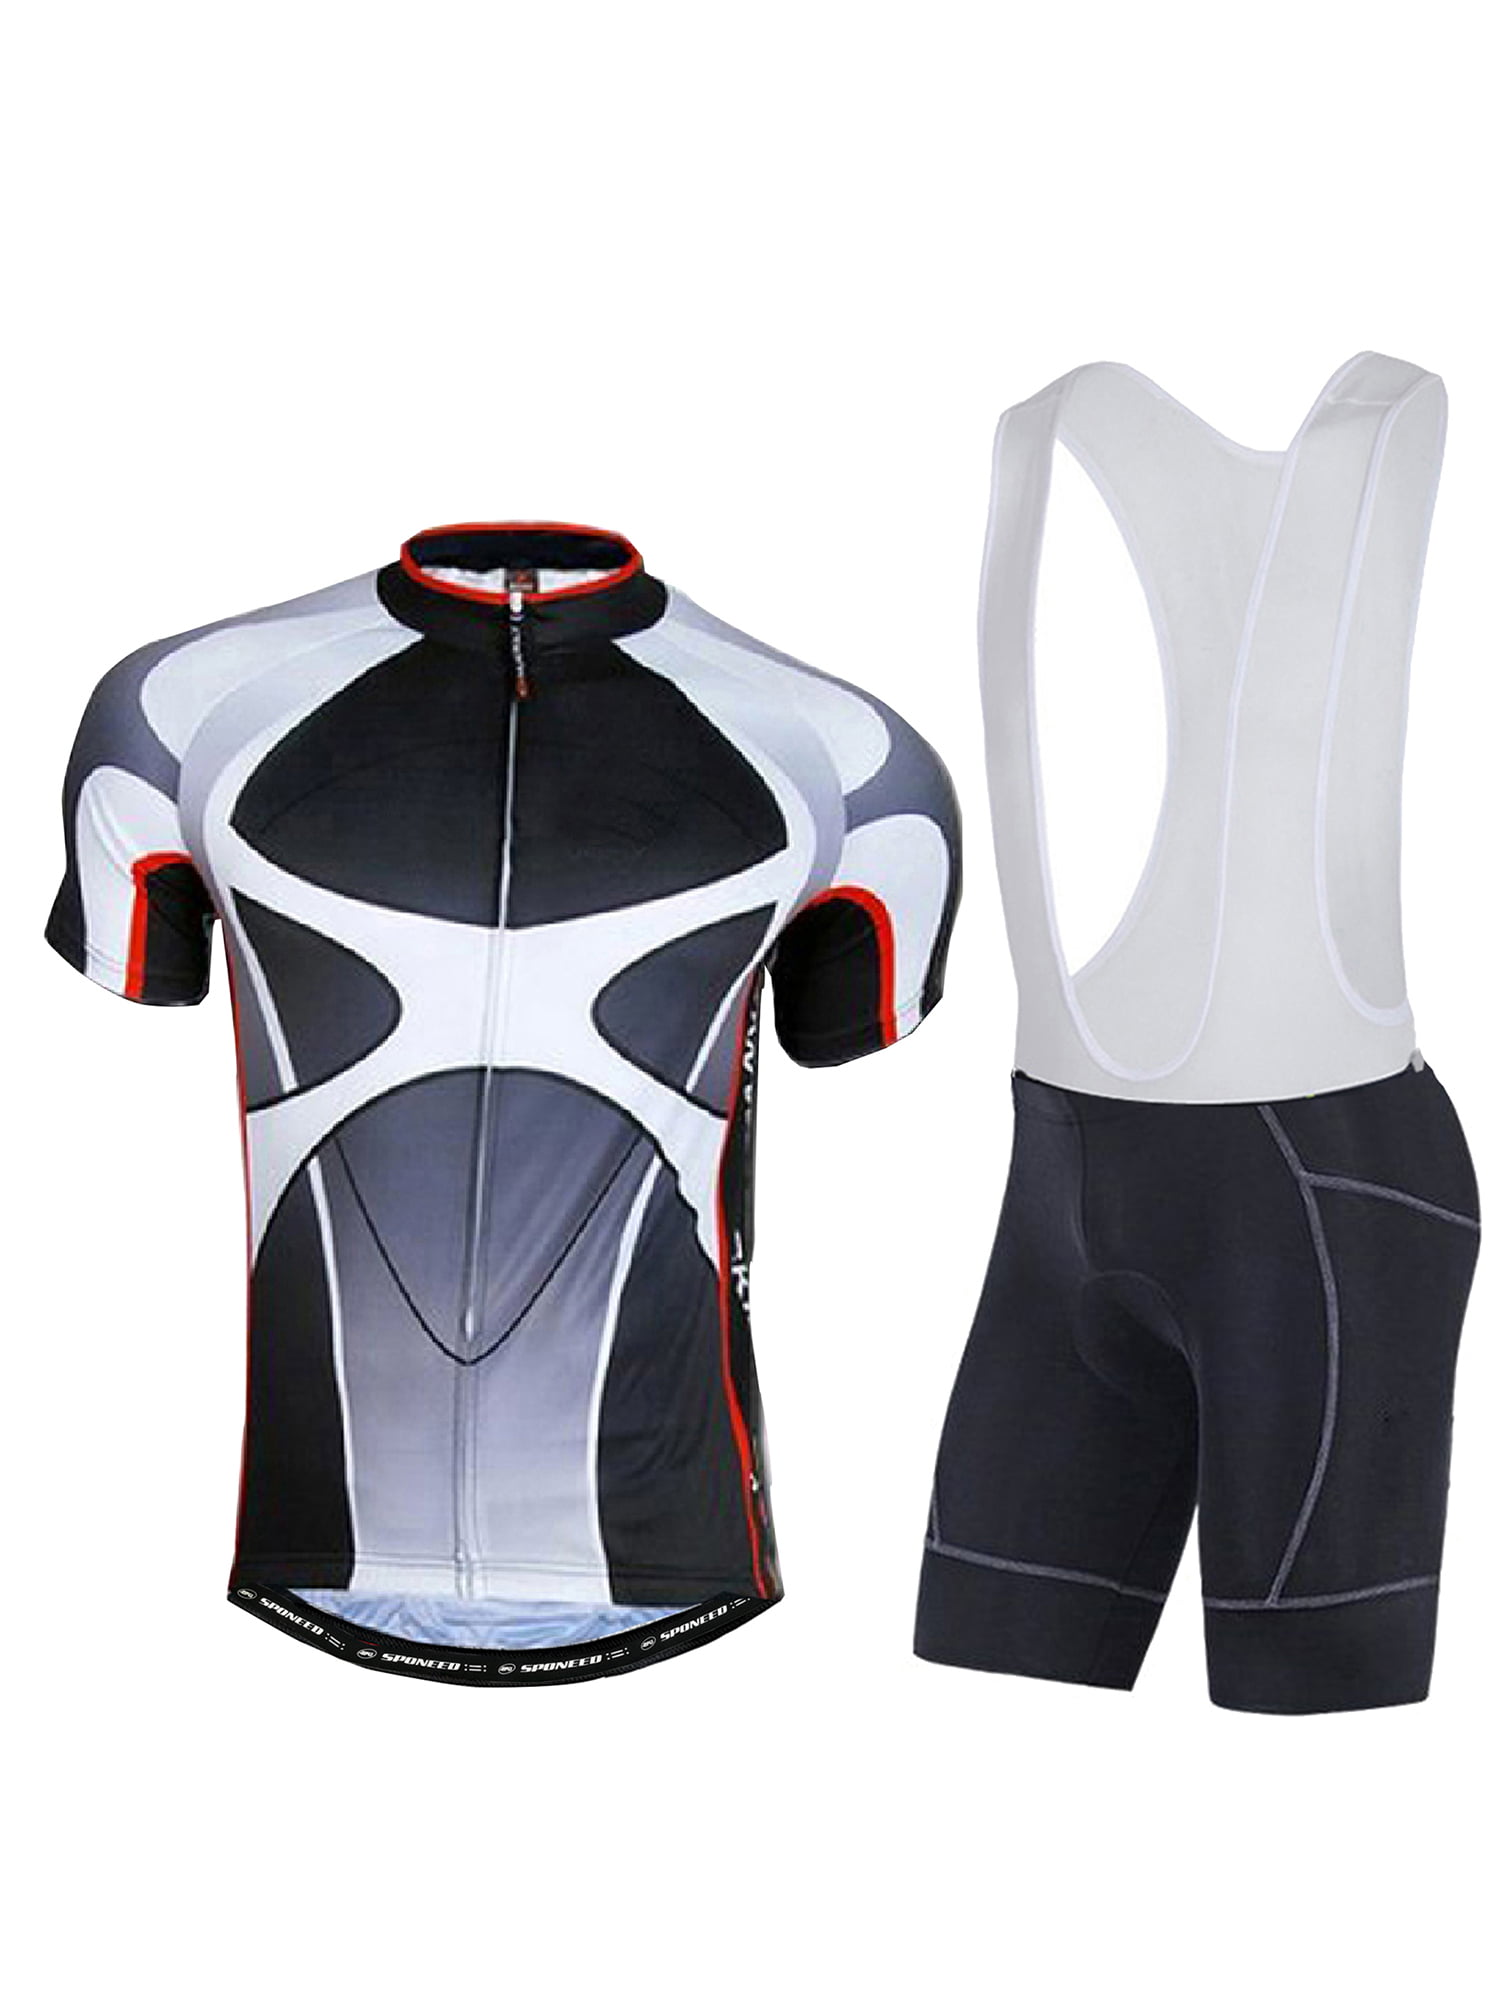 Men's Cycling Jerseys and Cycling Shorts Bike jersey Short Breathable Pure black 